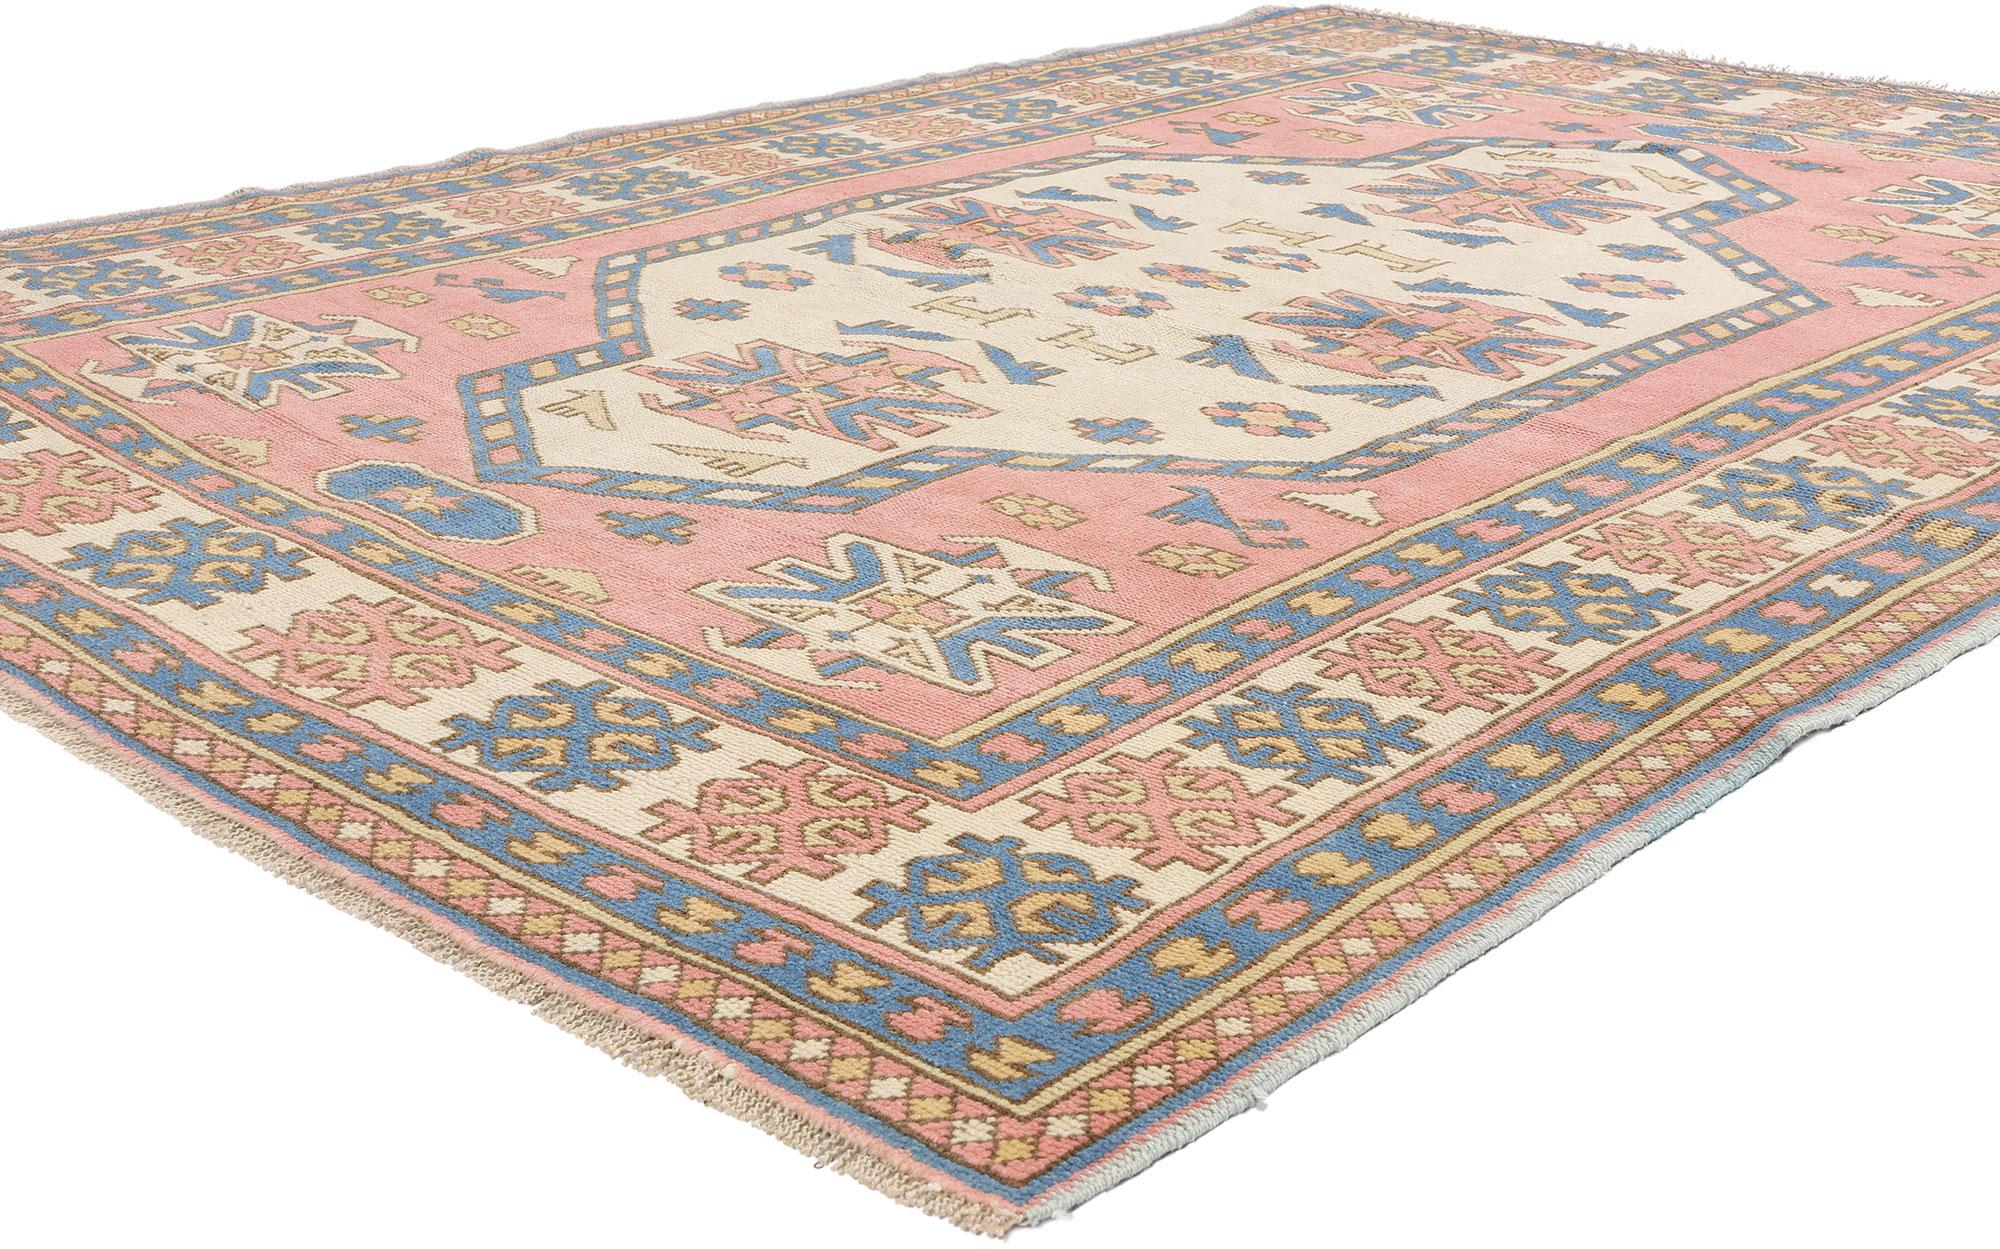 53944 Vintage Pink Persian Hamadan Rug, 05'07 x 07'06. Persian Nahavand Hamadan rugs, originating from Iran's Nahavand area within the broader Hamadan region, meld the weaving traditions of both regions, offering a distinct fusion of styles. Crafted